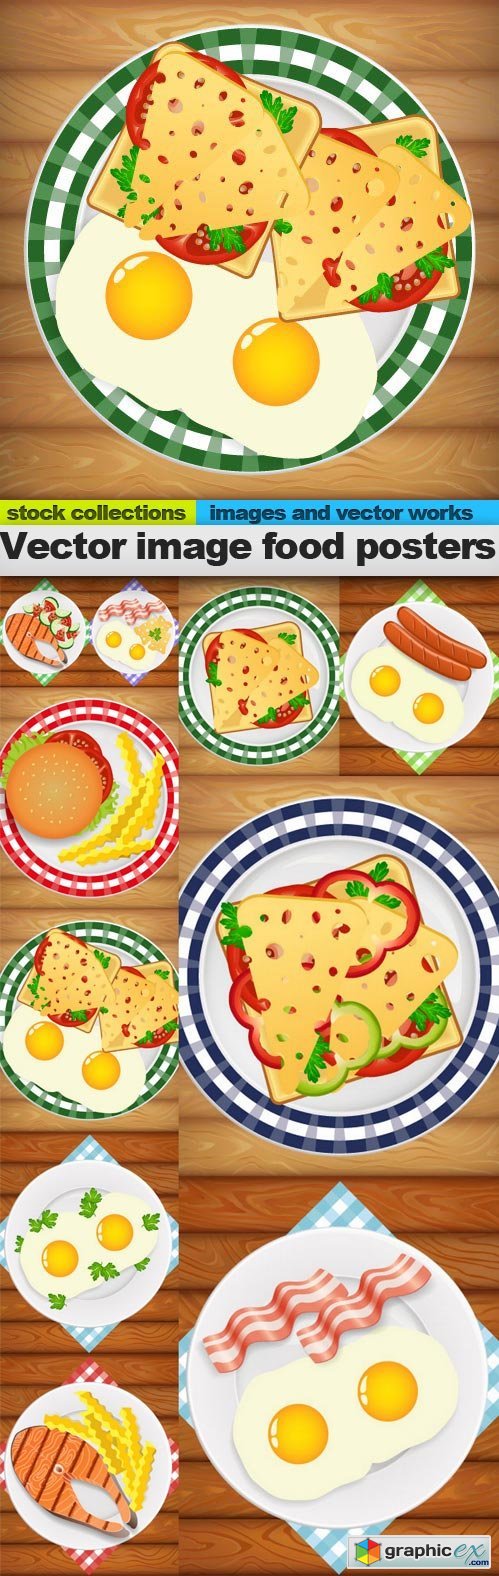 Vector image food posters, 10 x EPS